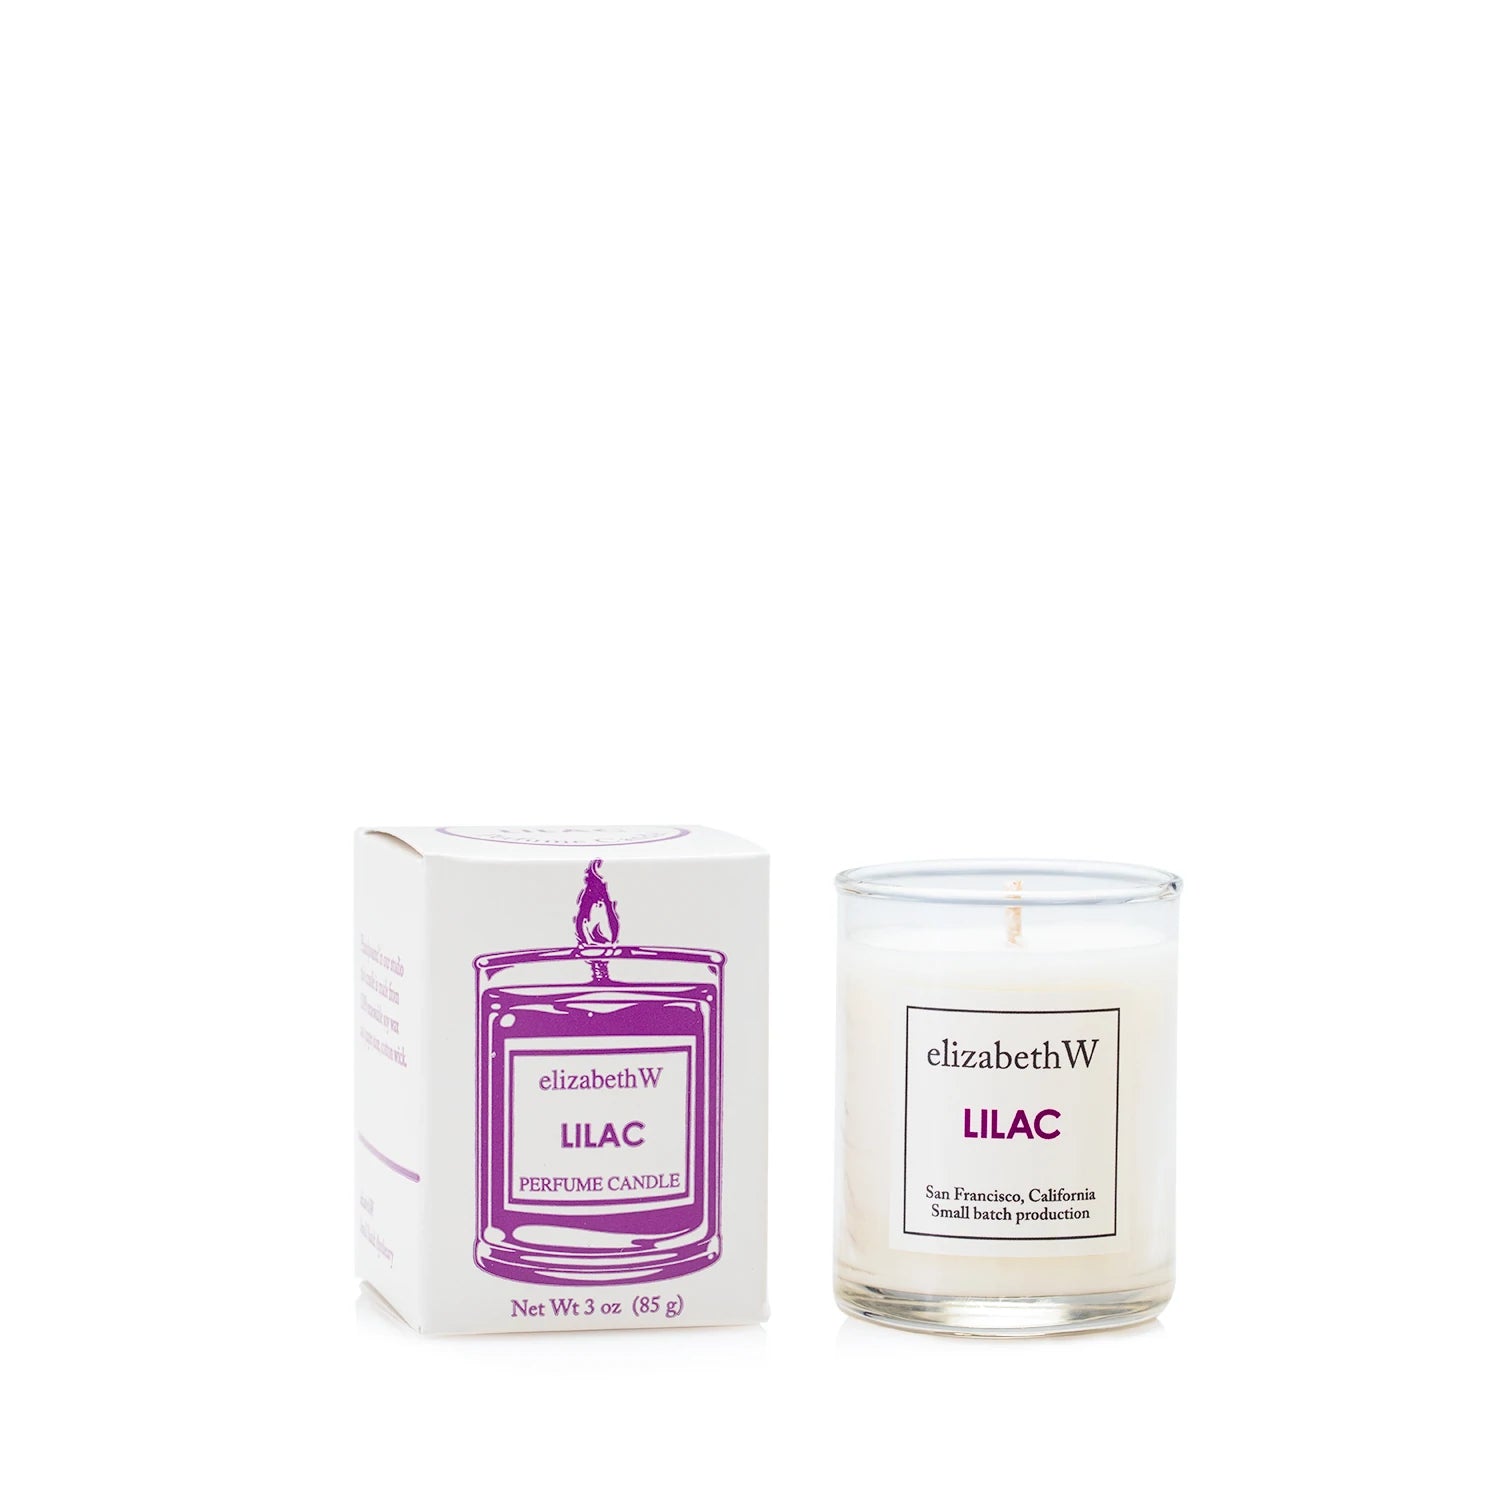 Lilac Perfume Candles